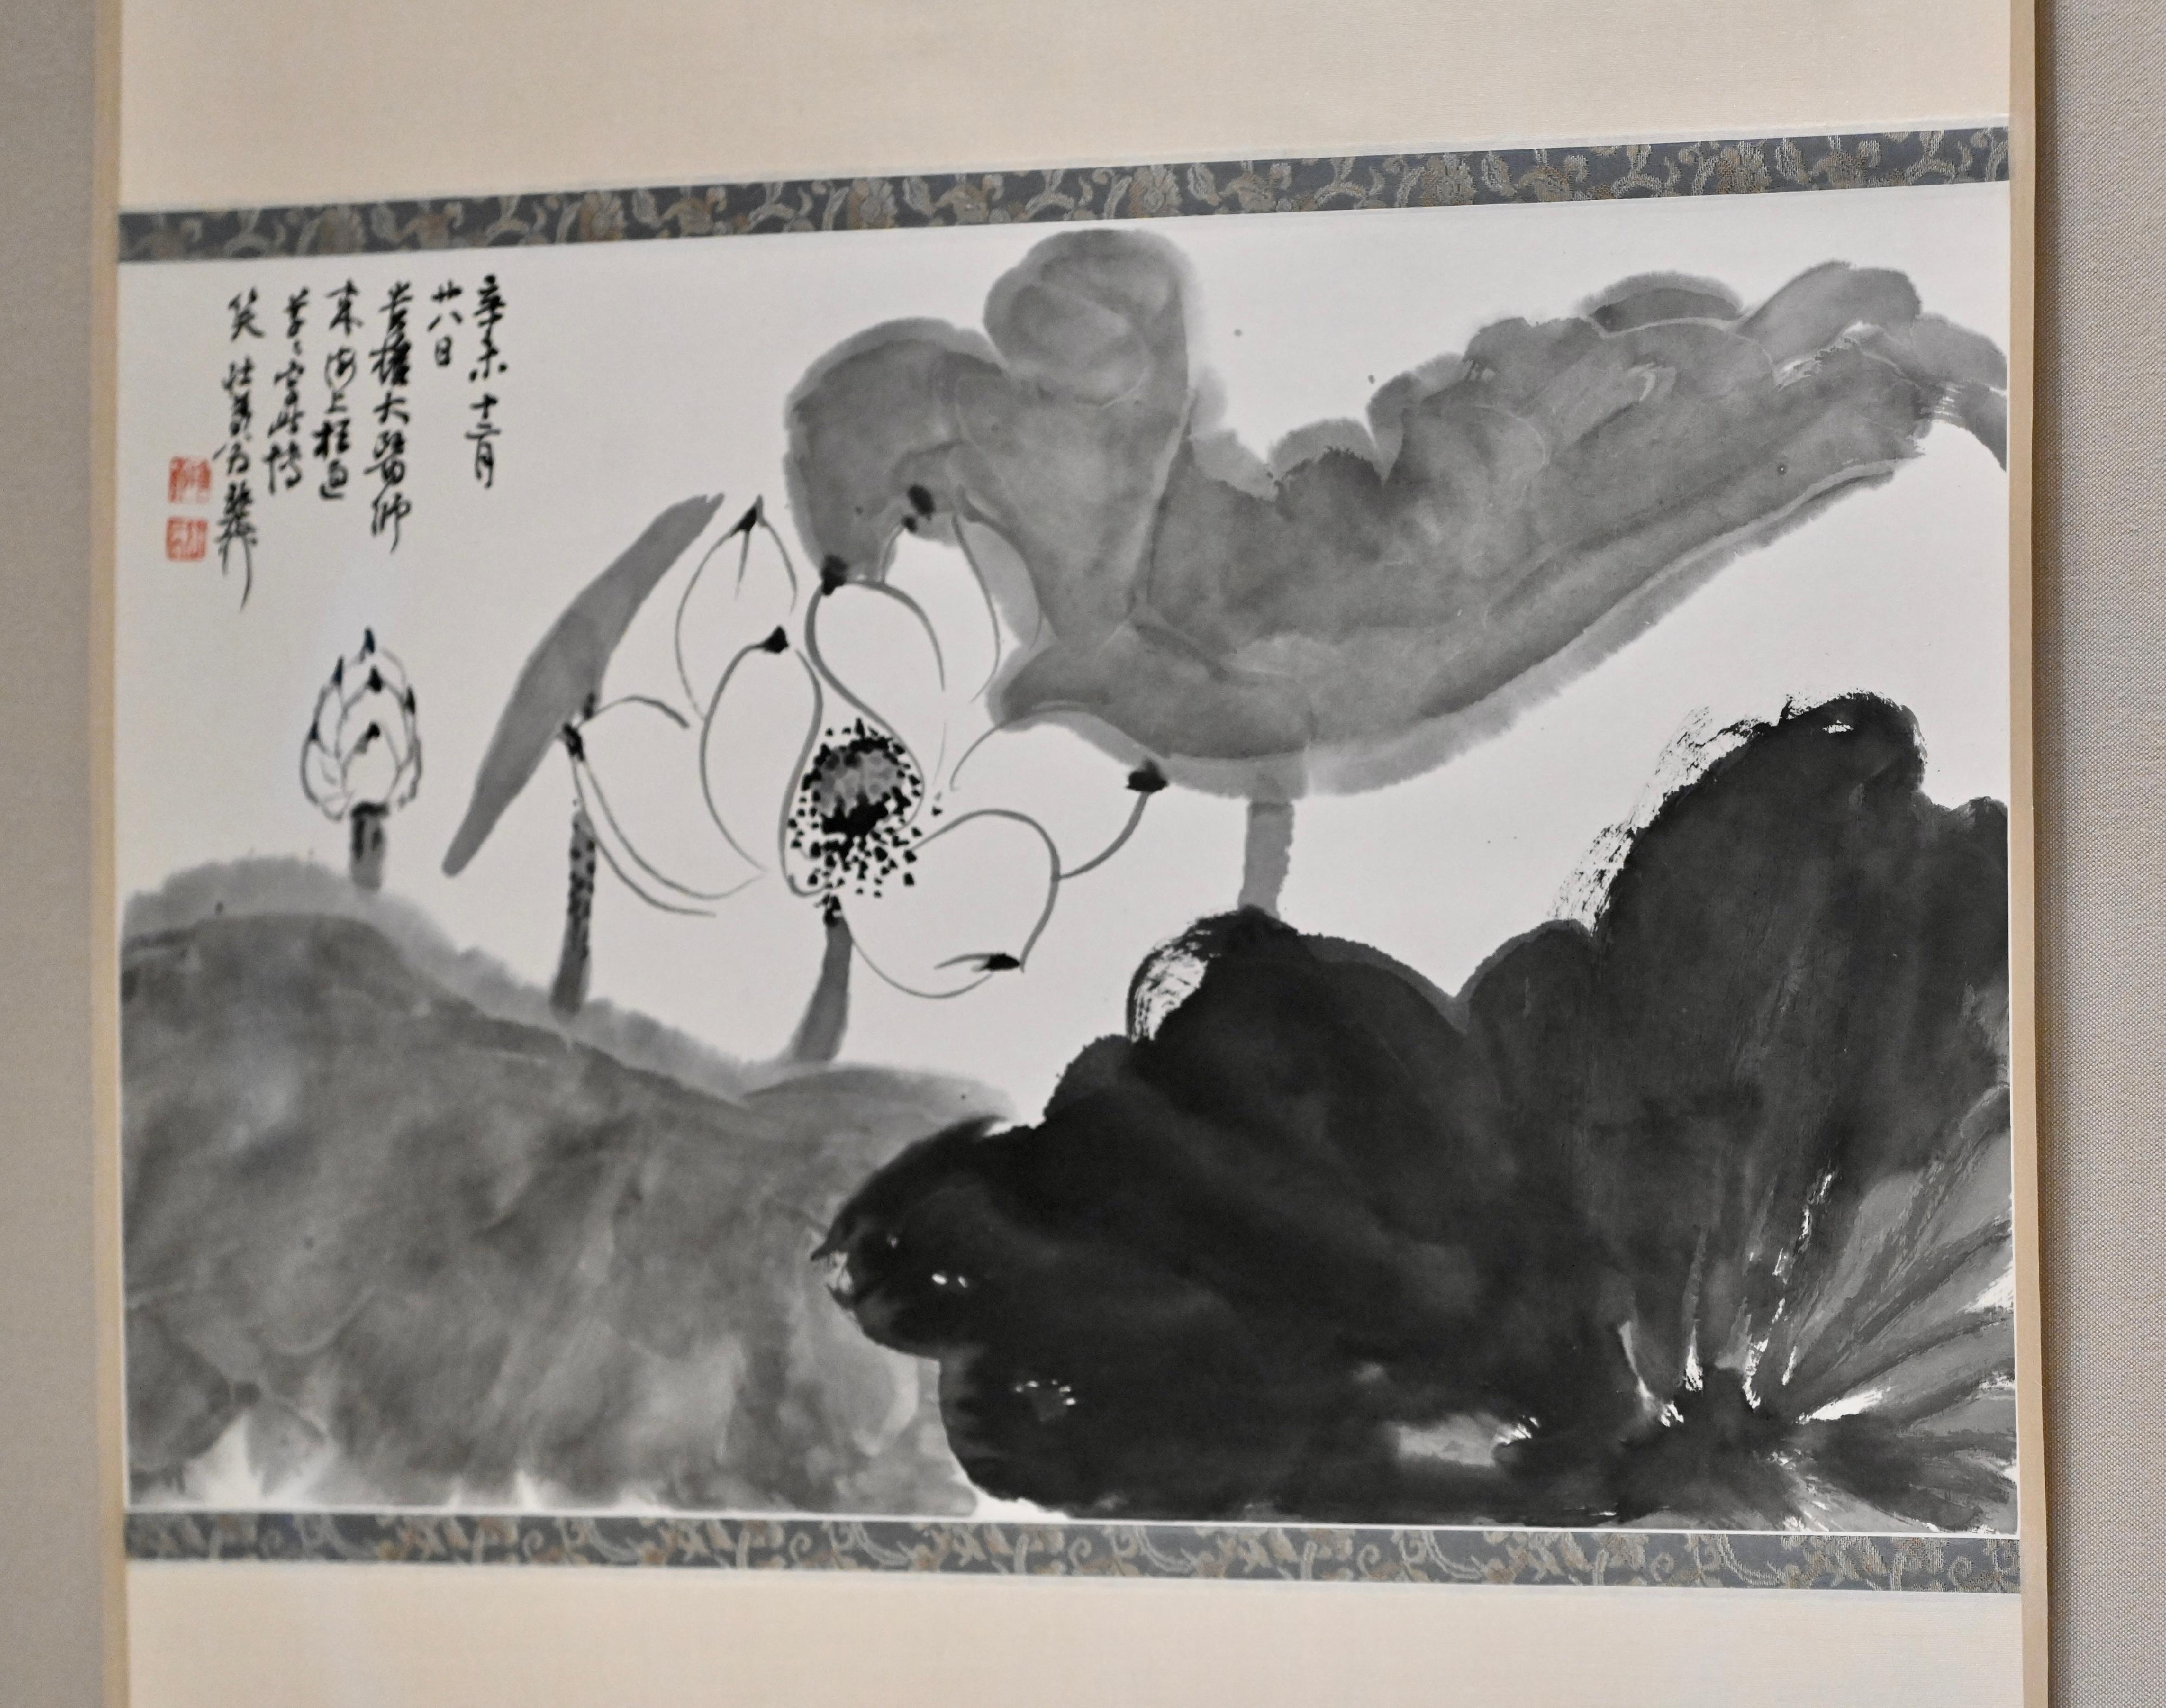 "A Match Made in Painting: Selected Works of Xie Zhiliu and Chen Peiqiu from the Jingguanlou Collection" exhibition will be held at the Hong Kong Museum of Art from tomorrow (July 14). Picture shows Xie Zhiliu's painting "White lotus", which was gifted to Dr Wong Kwai-kuen by the artist.